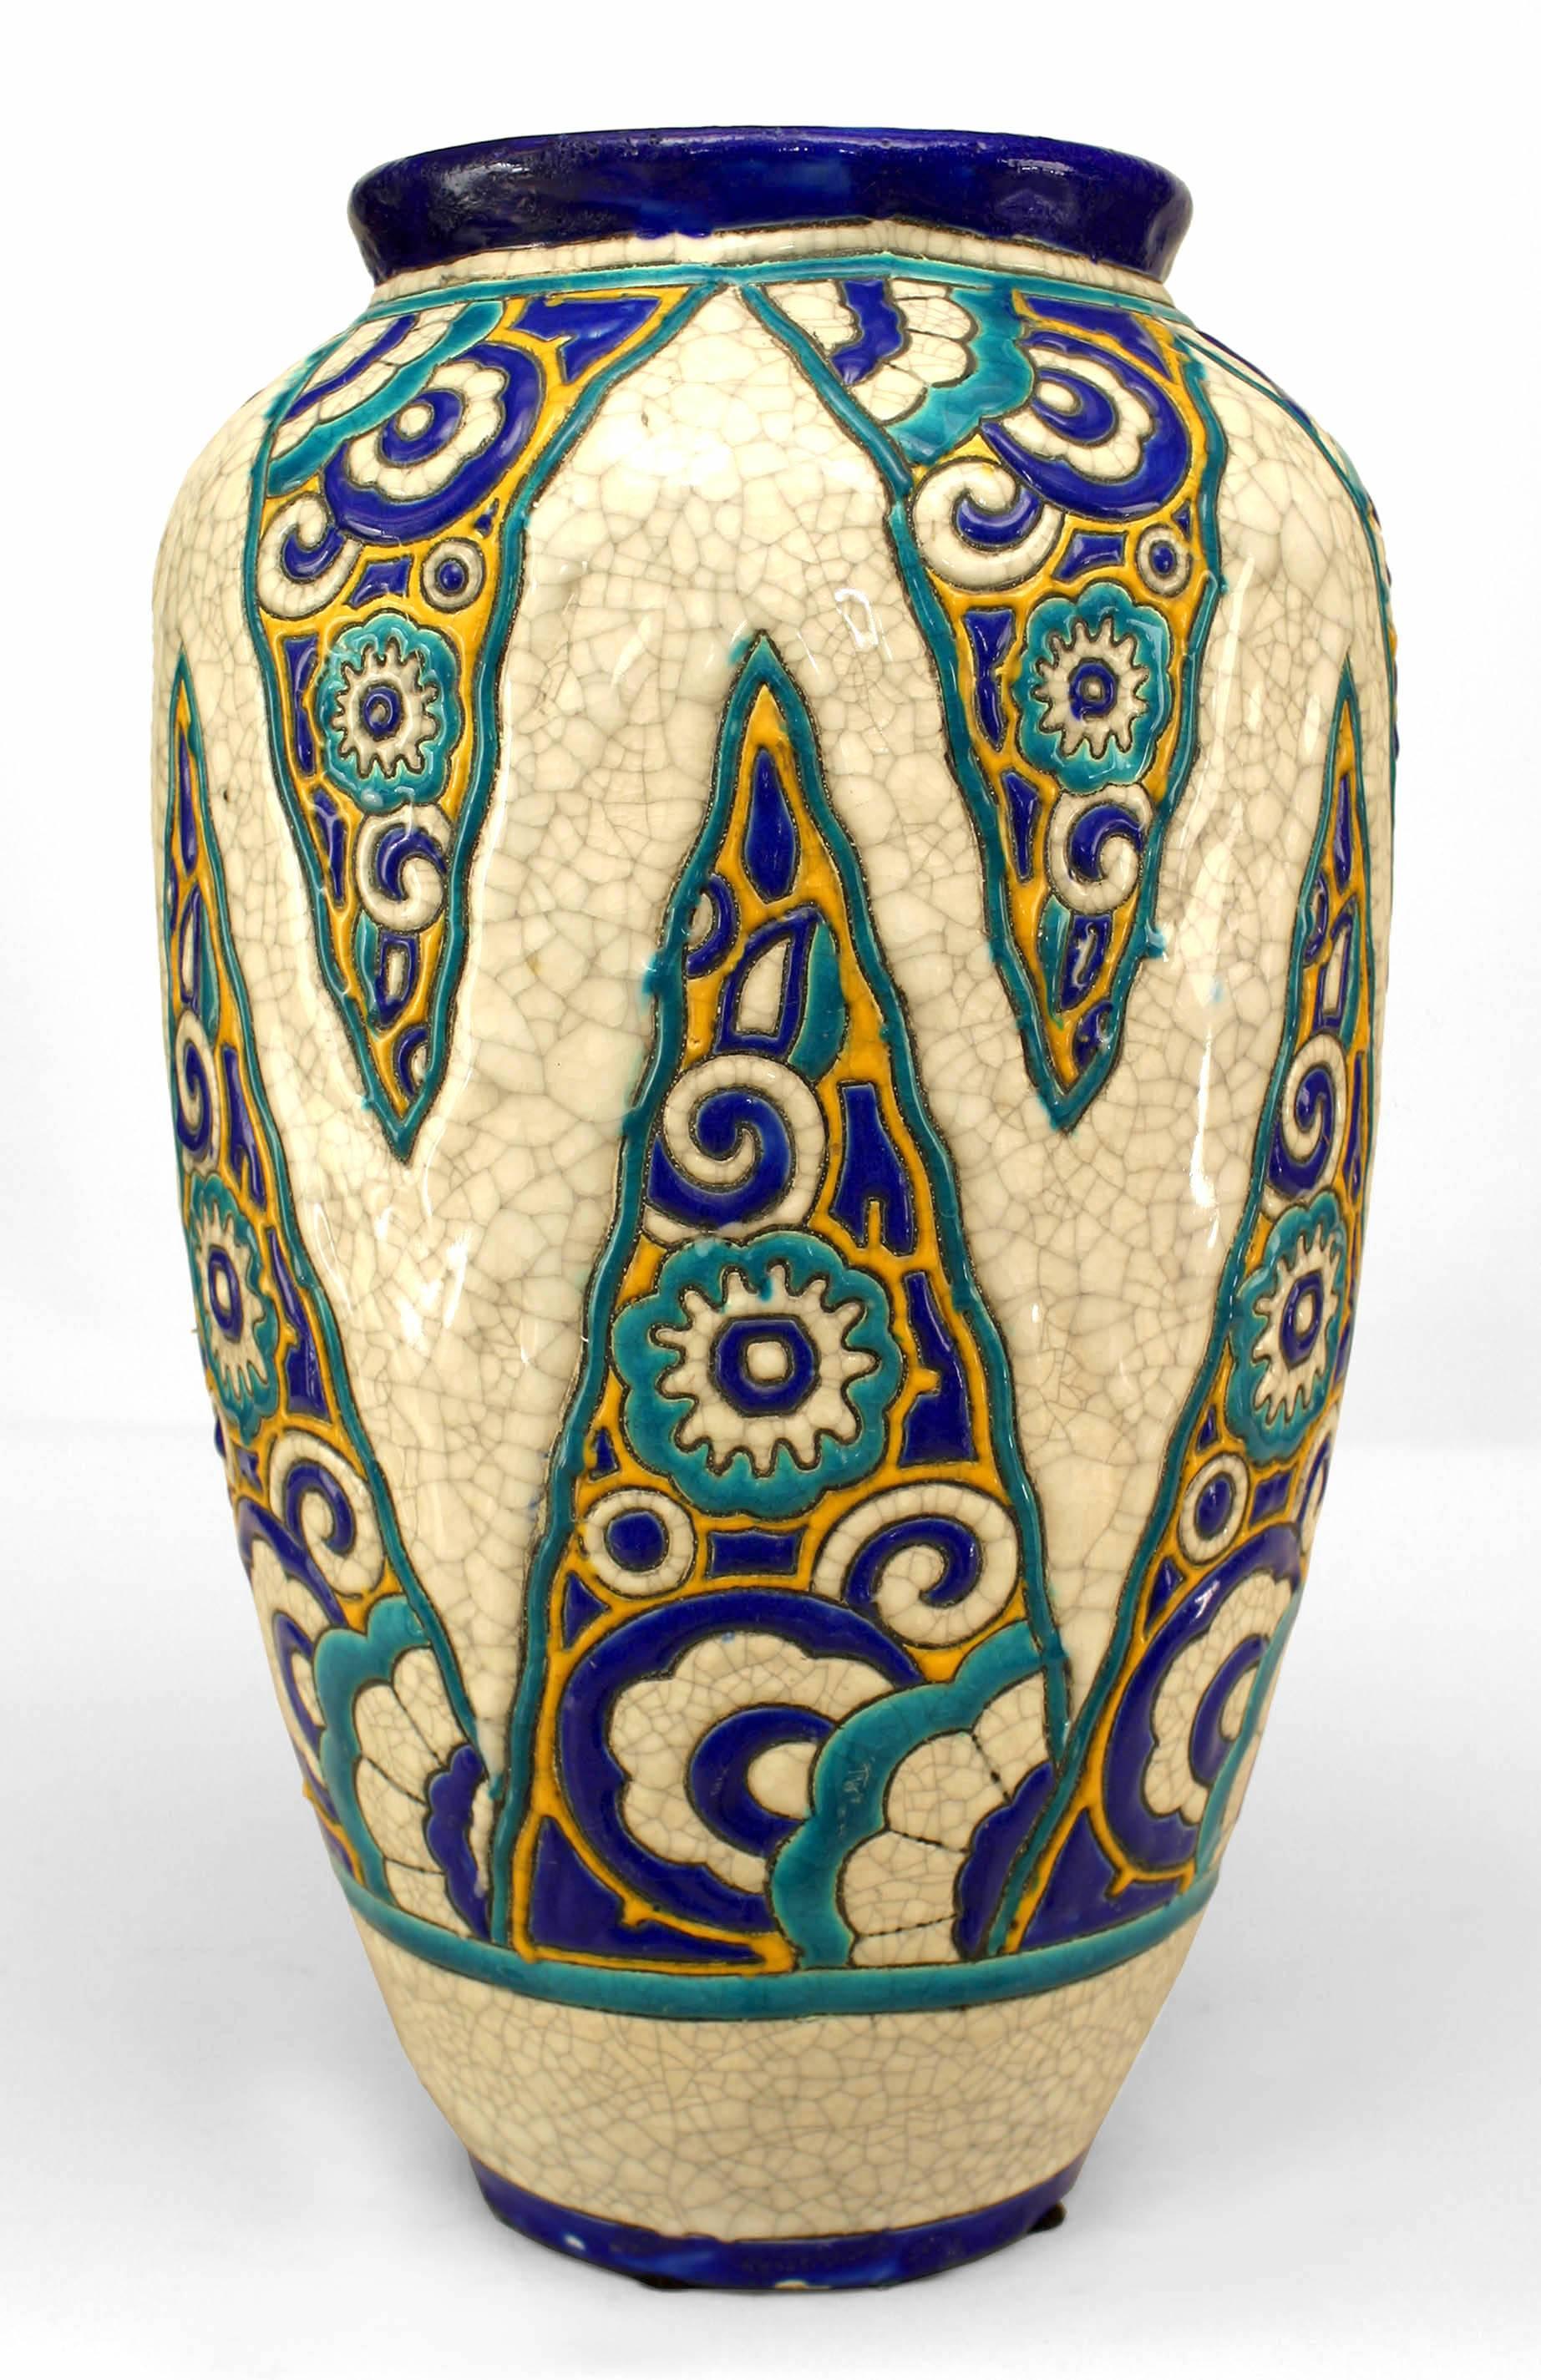 Art Deco (Belgium) crackled earthenware vase with blue & green trim with geometric & circle design stamped Boch Frs LA LOUVIERE .
